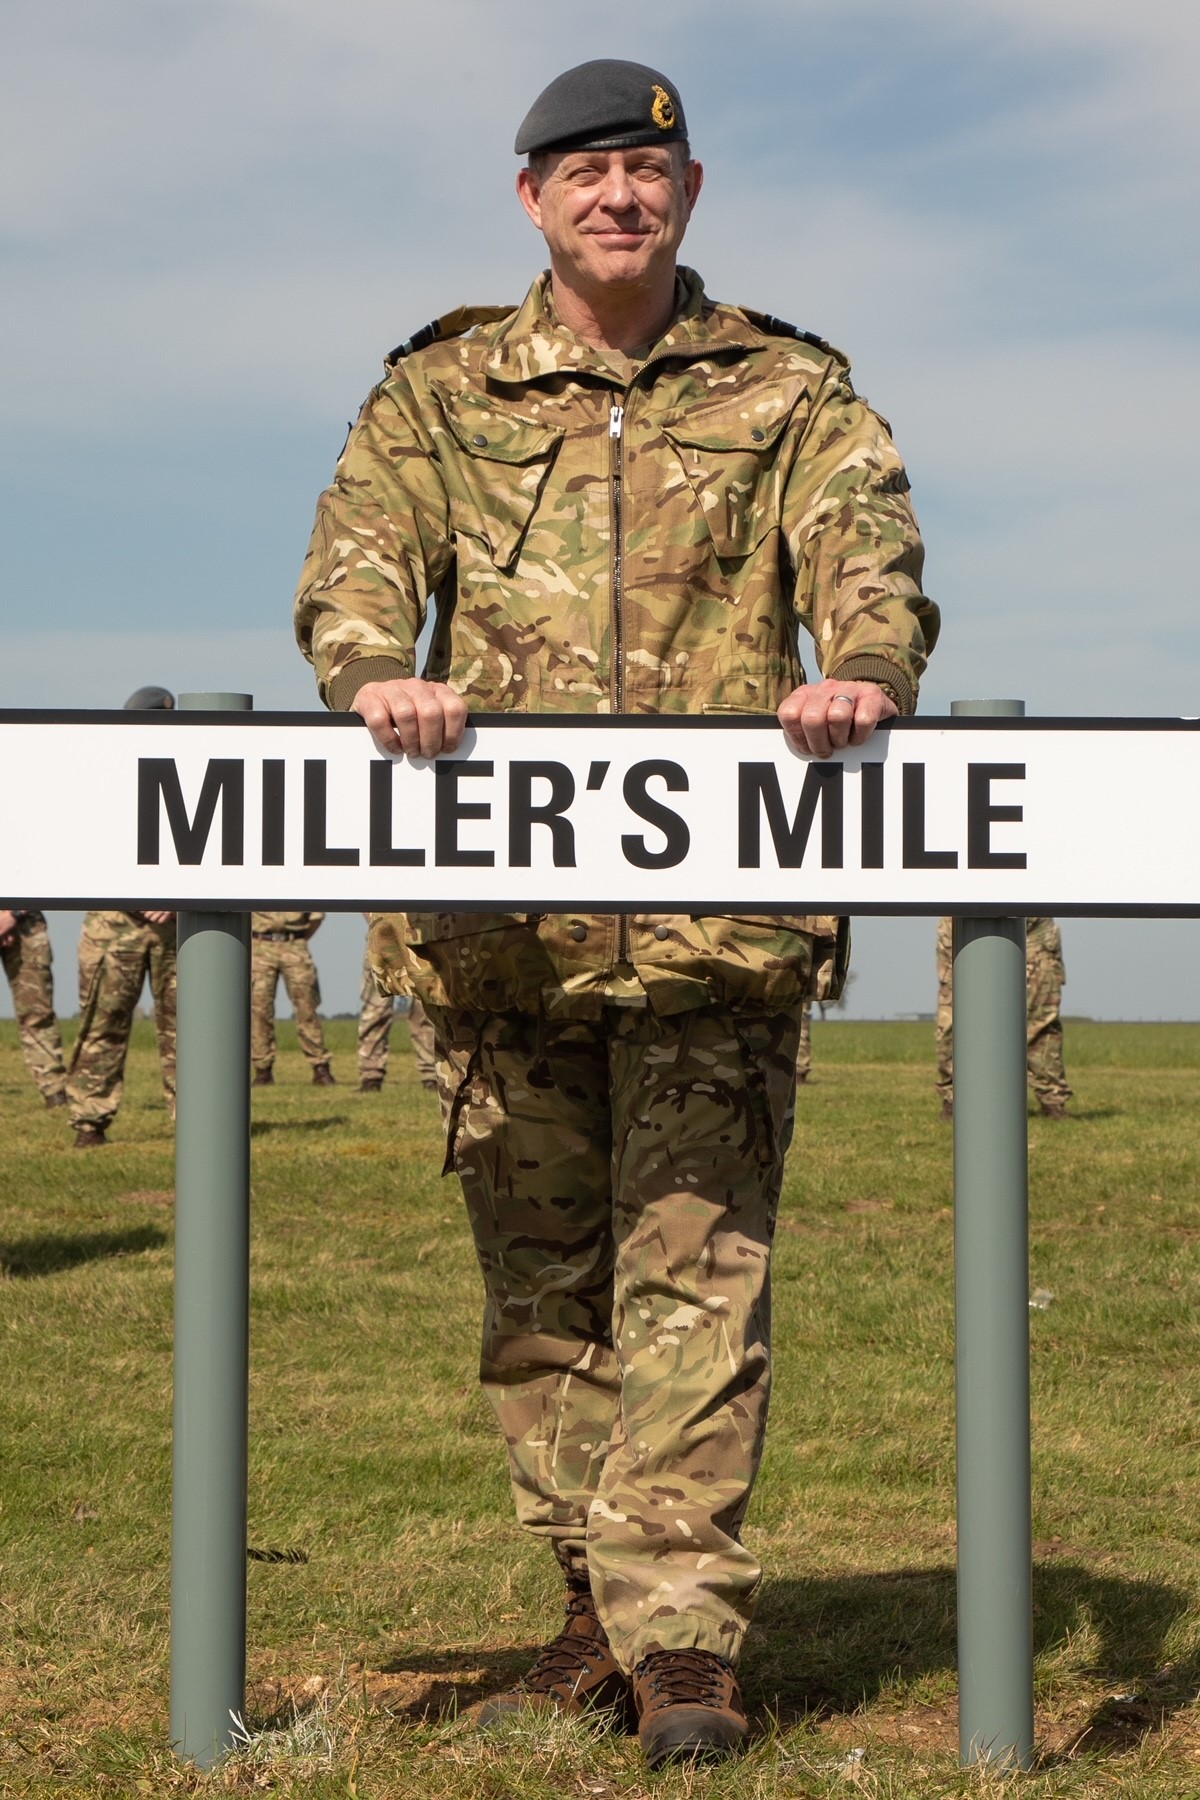 Air Commodore Miller with the Miller Mile road sign